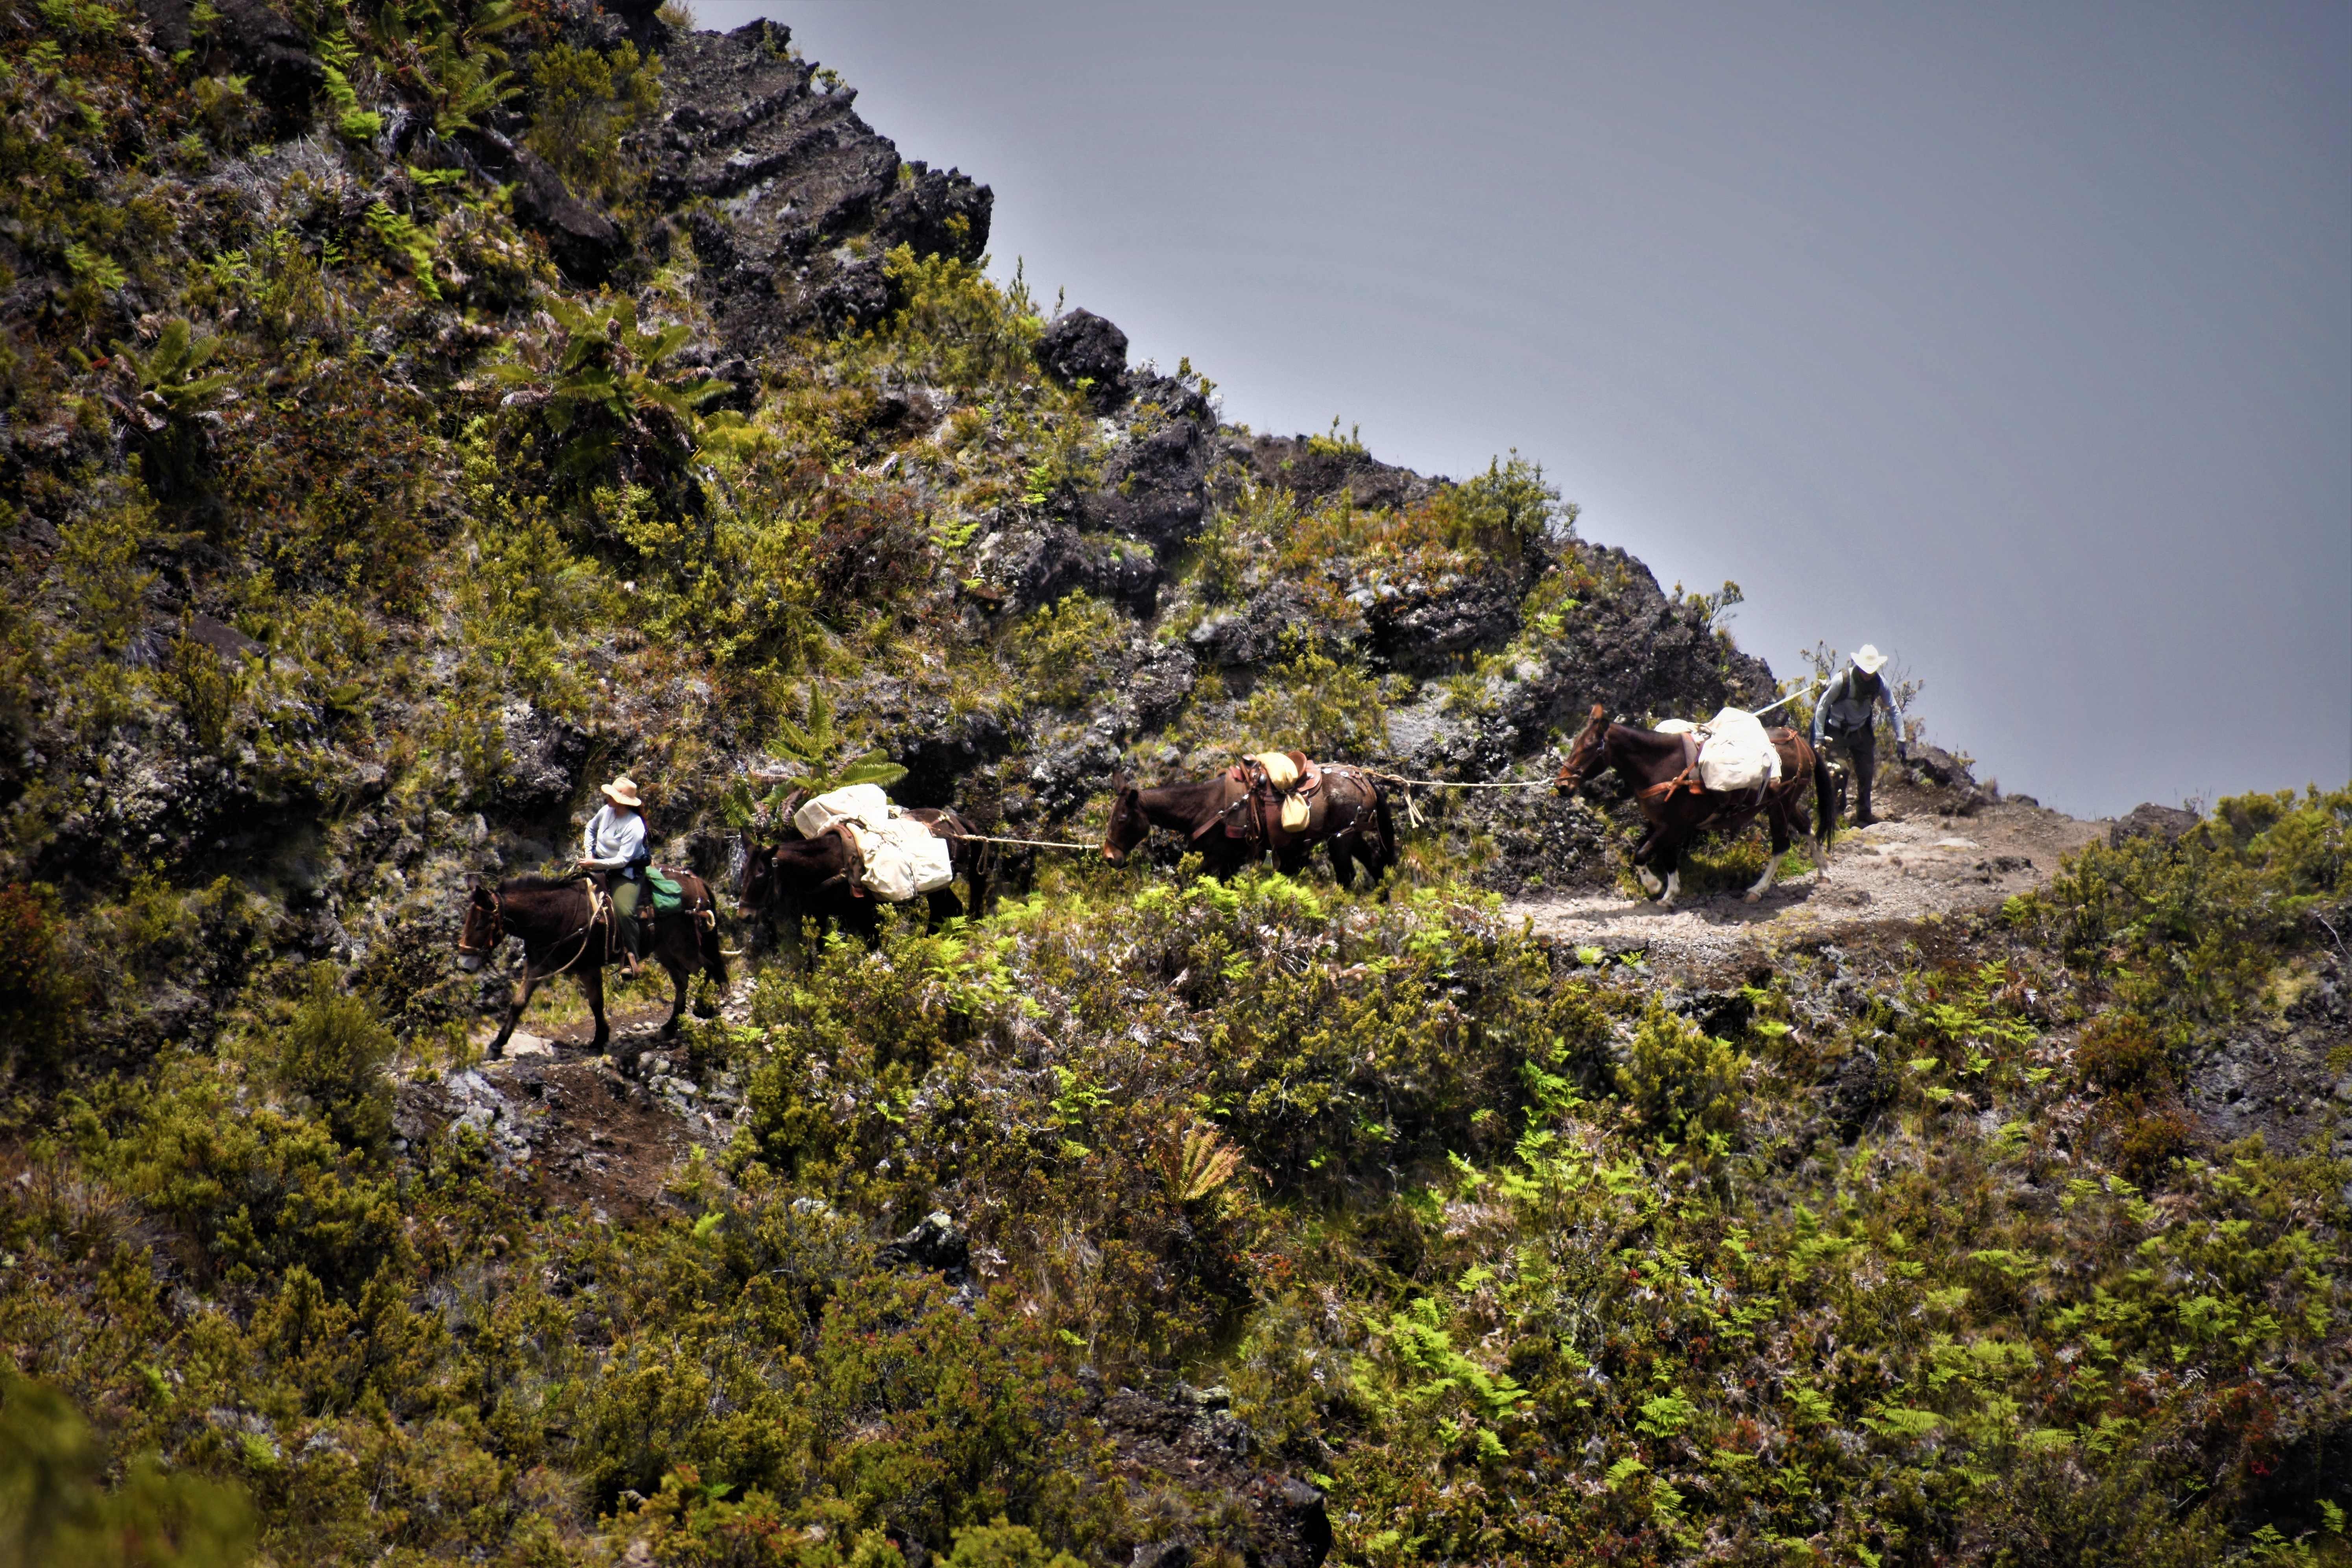 mules on the mountain side